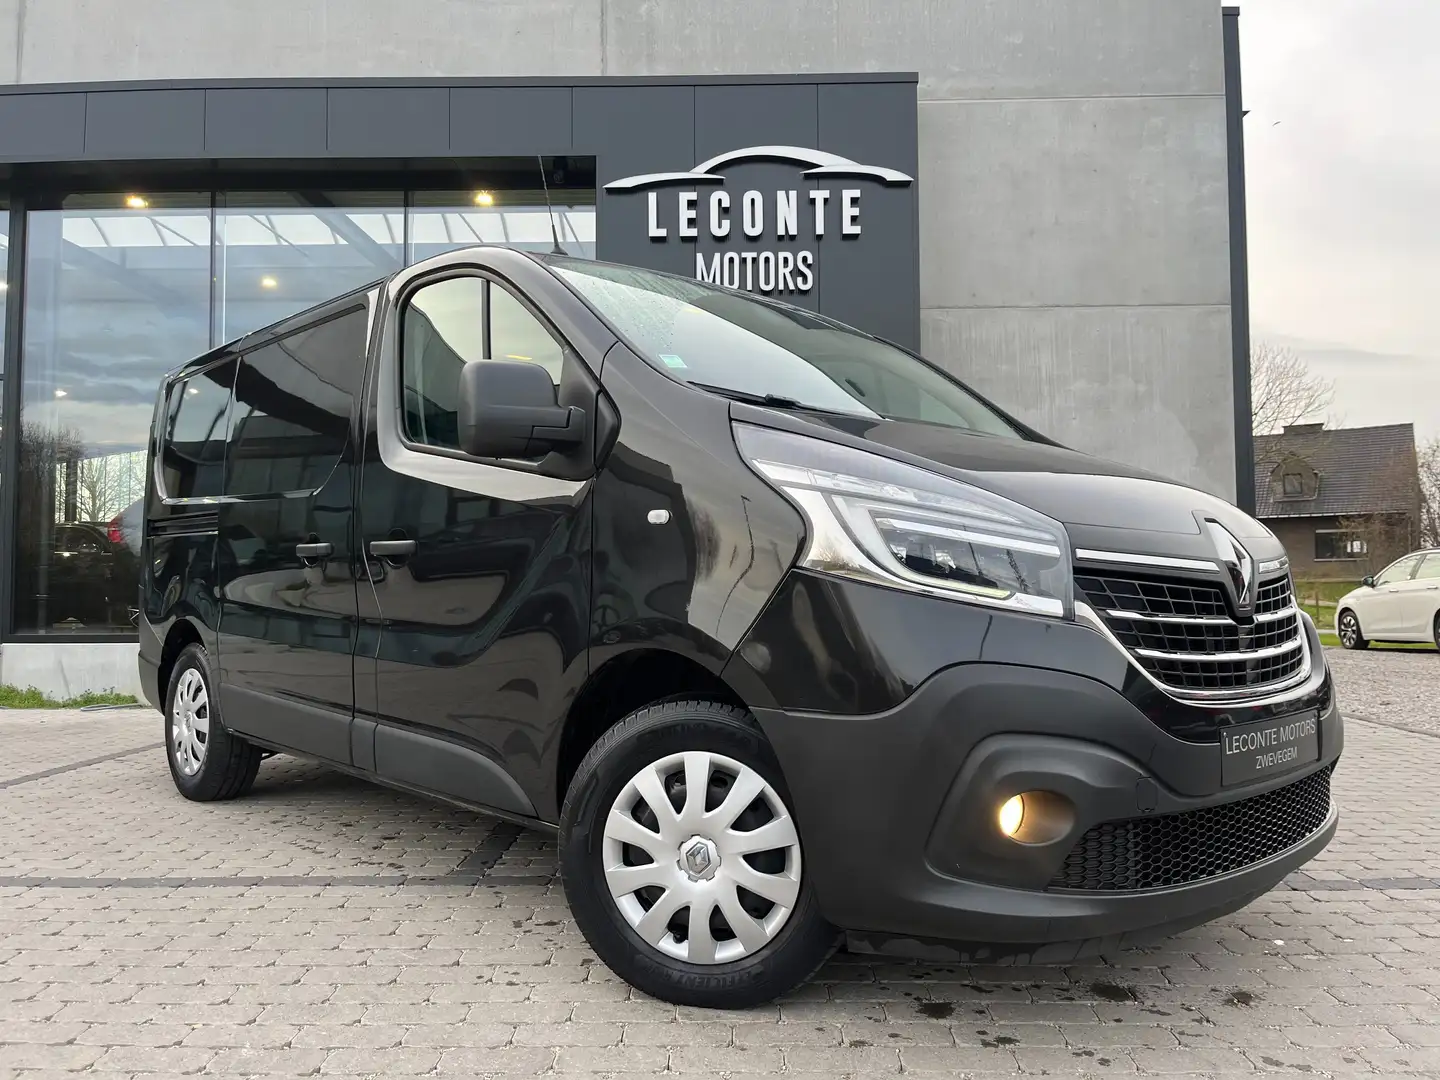 Renault Trafic 2.0DCI Lichte Vracht 3-zit/LED/Gps/Camera/PDC/BLTH crna - 1